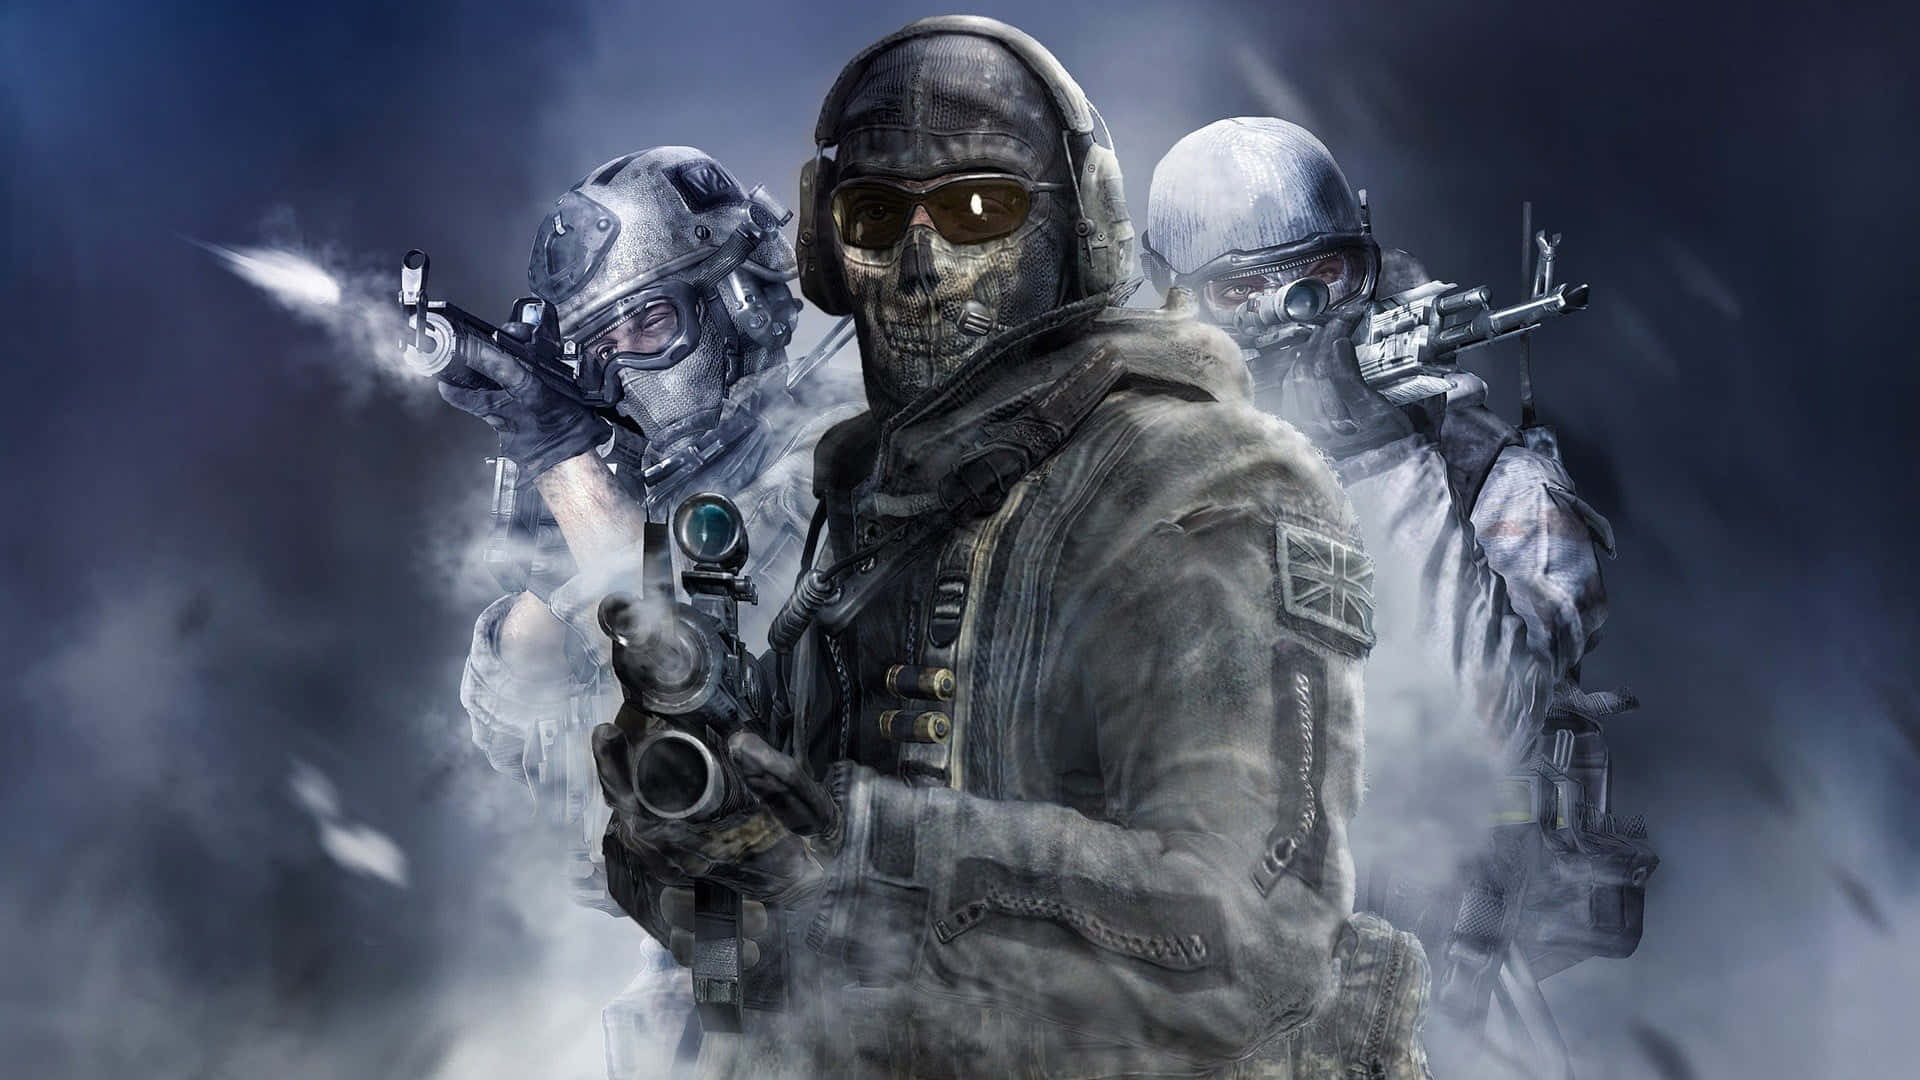 Elite Call of Duty Soldiers Ready for Battle Wallpaper